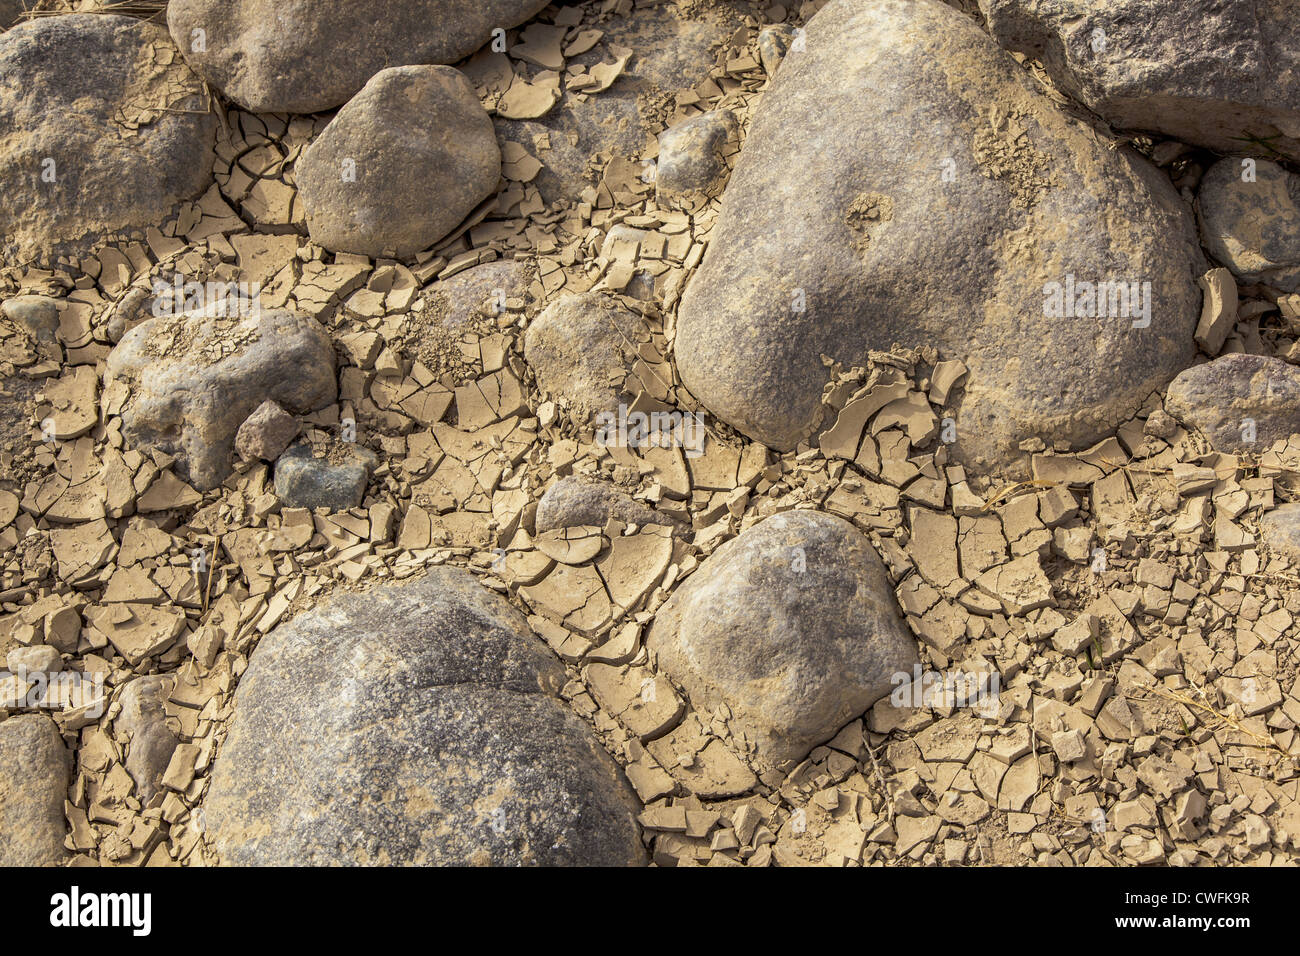 Patchwork of cracked dry mud and rocks caused by severe drought in southwest United States Stock Photo